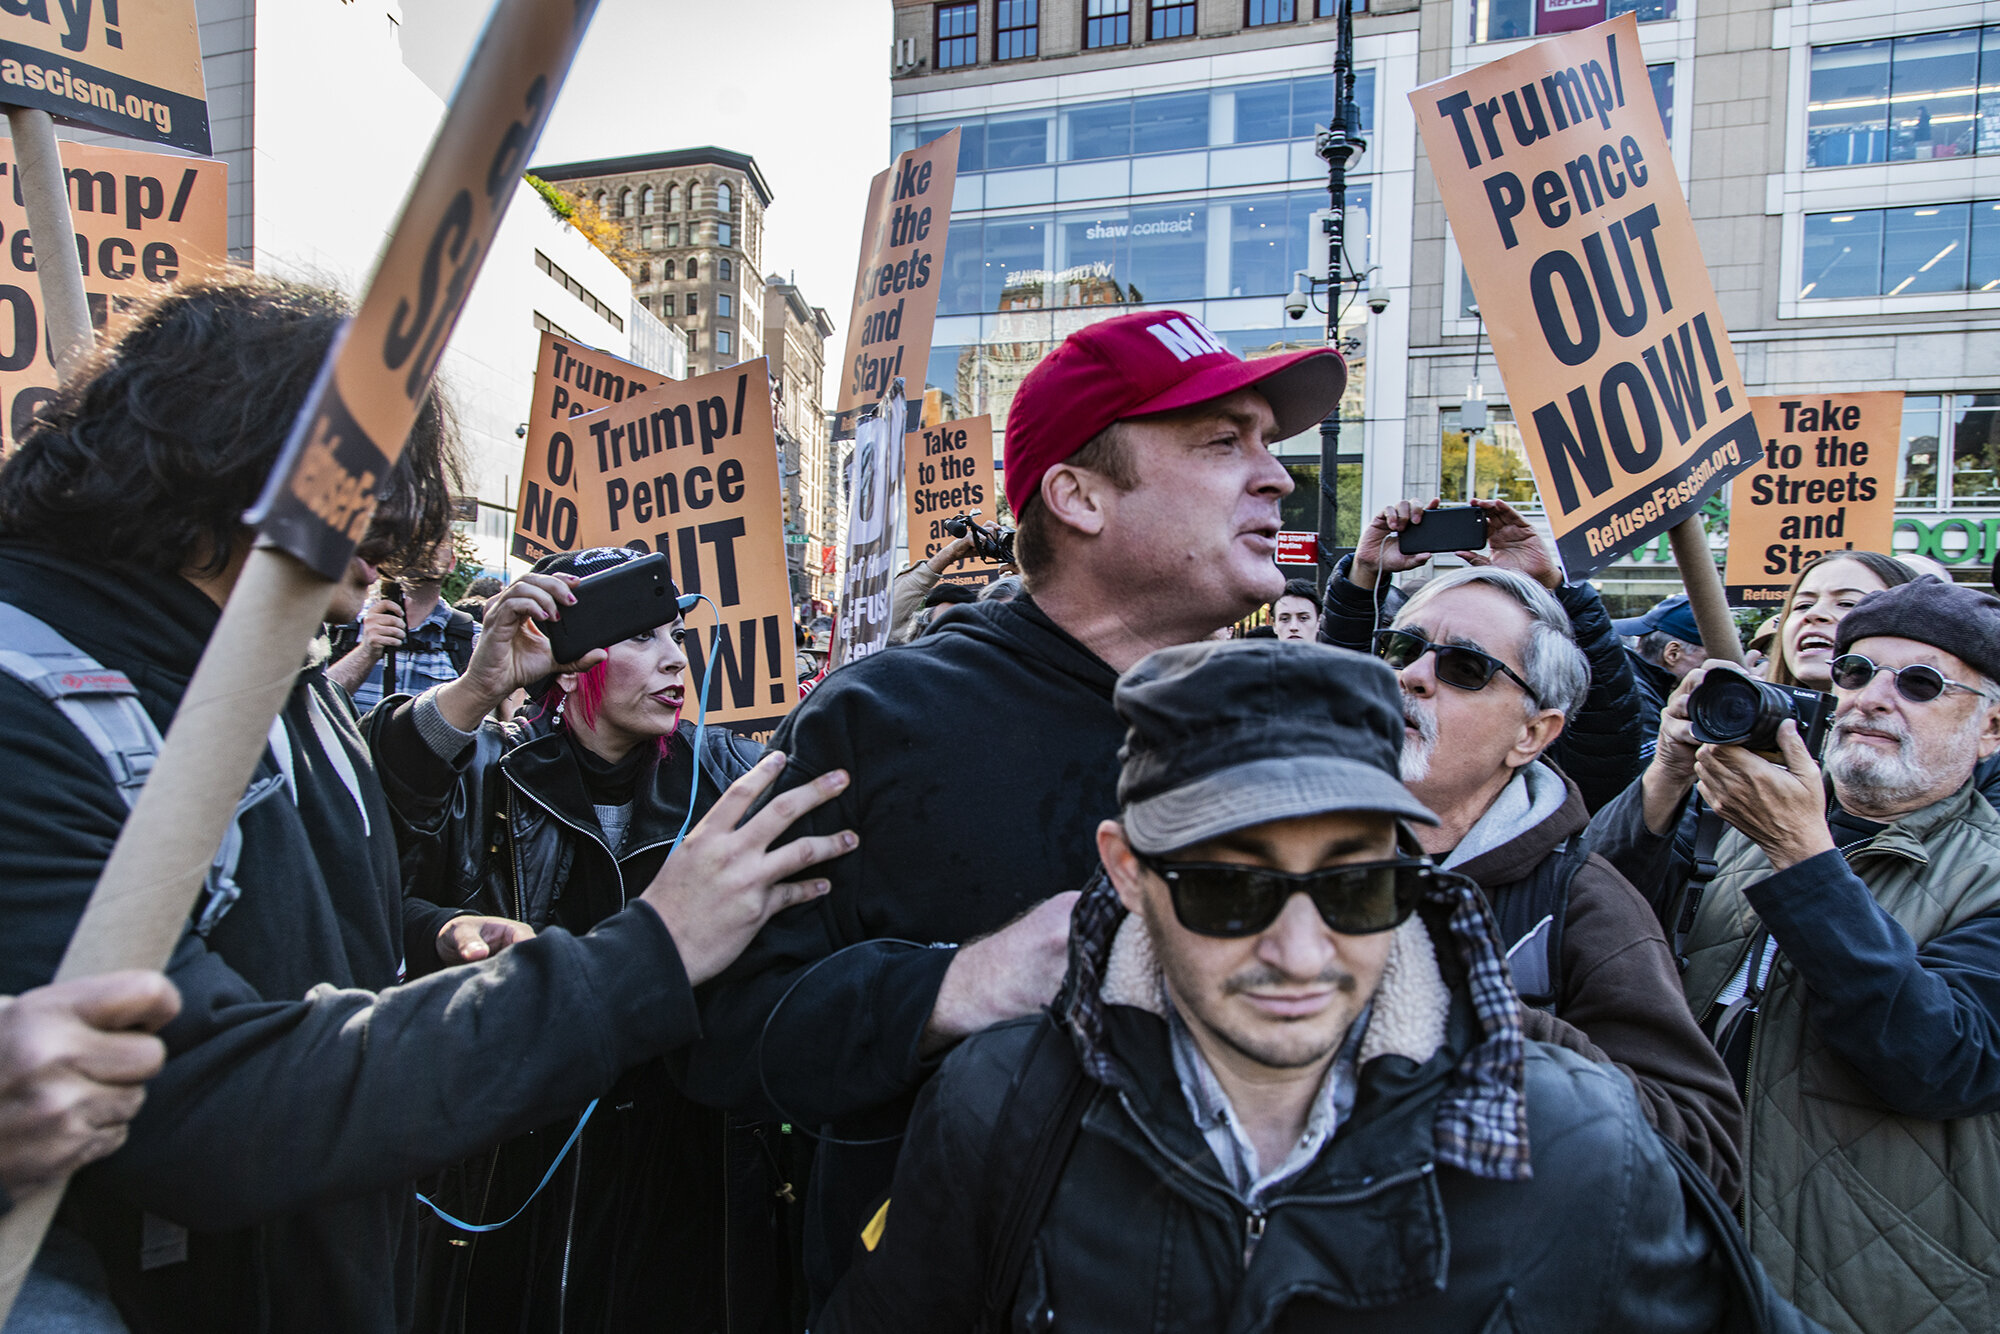 OUTNOW_Protest_2019_NYC-1637.jpg